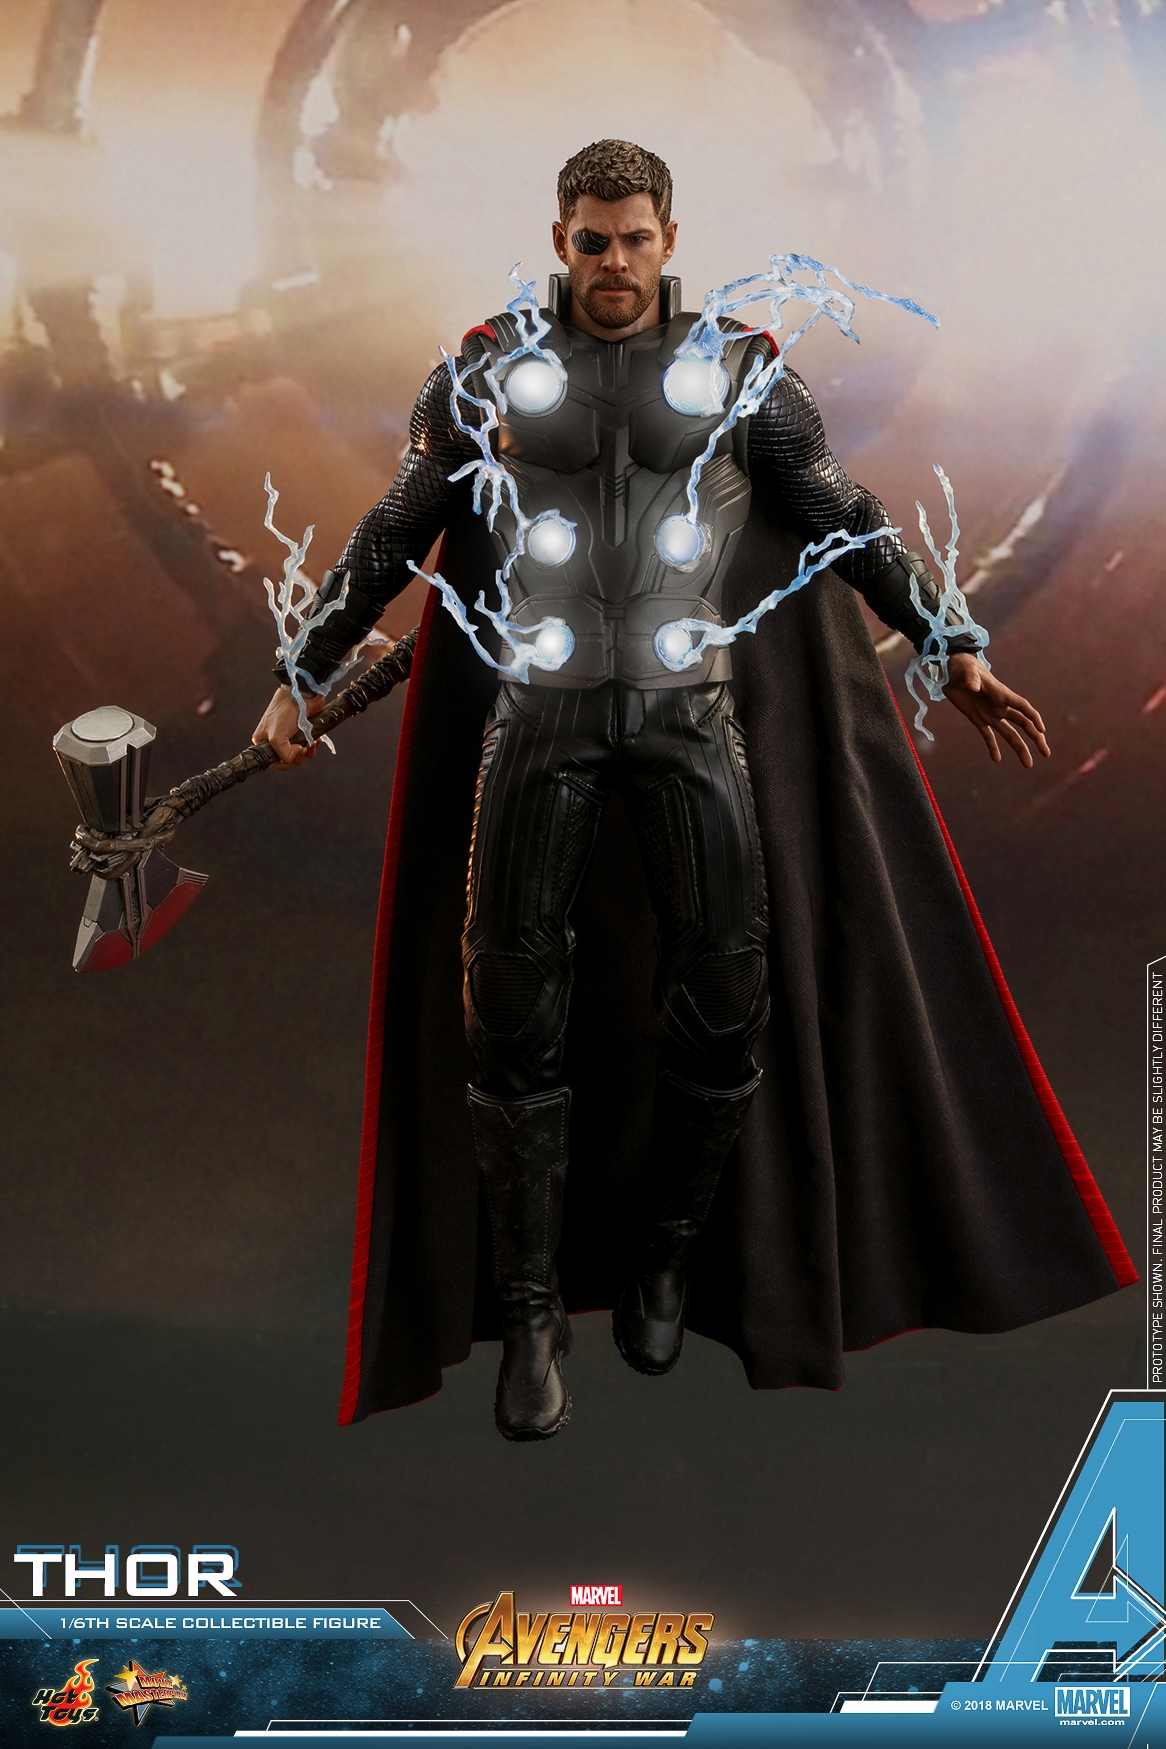 Hot-Toys-MMS474-Avengers-Infinity-War-Thor-Collectible-Figure-018.jpg